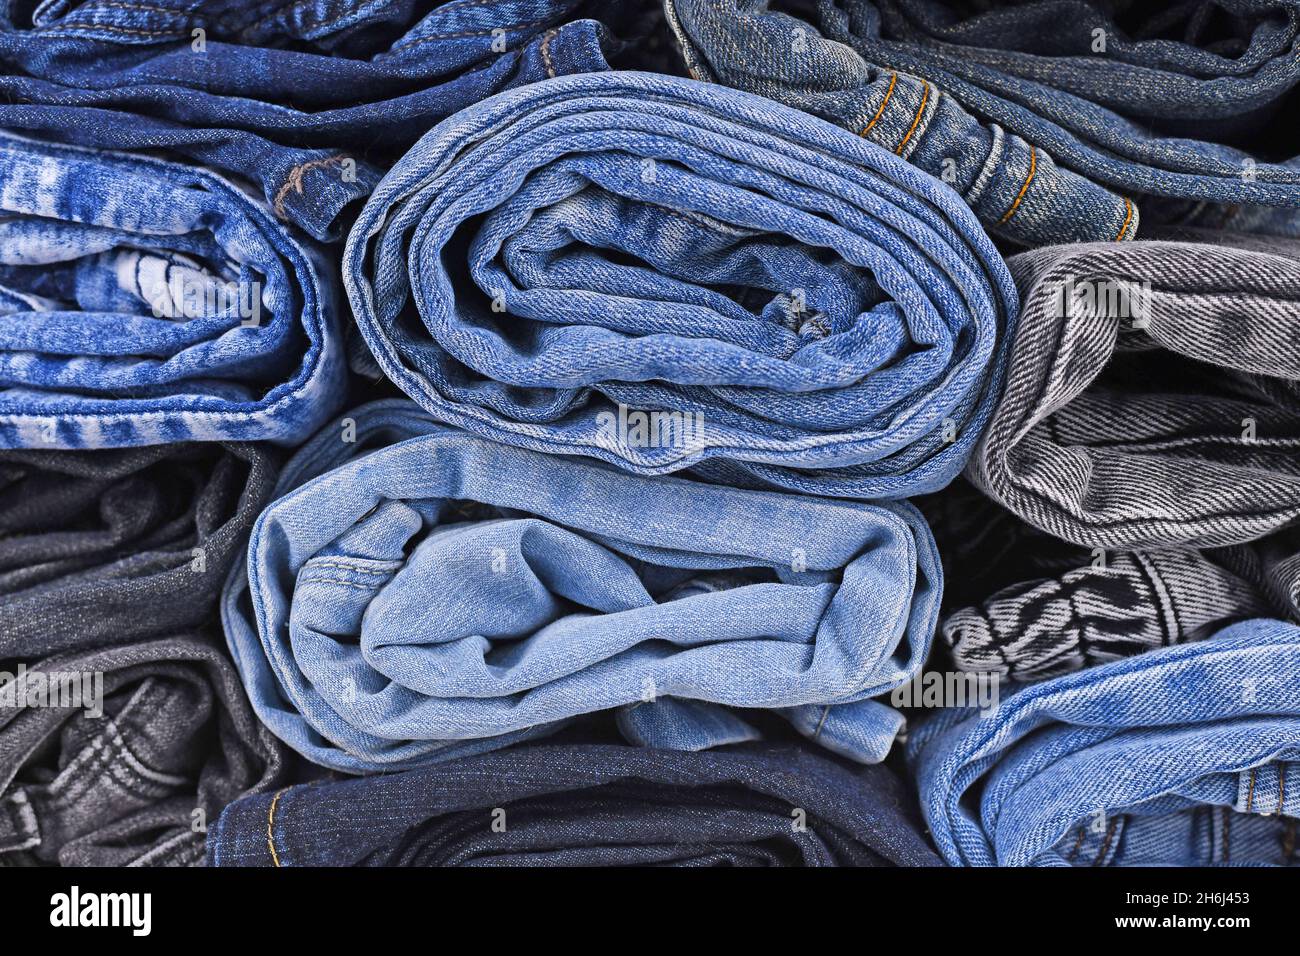 Different colored jeans pants rolled up in pile Stock Photo